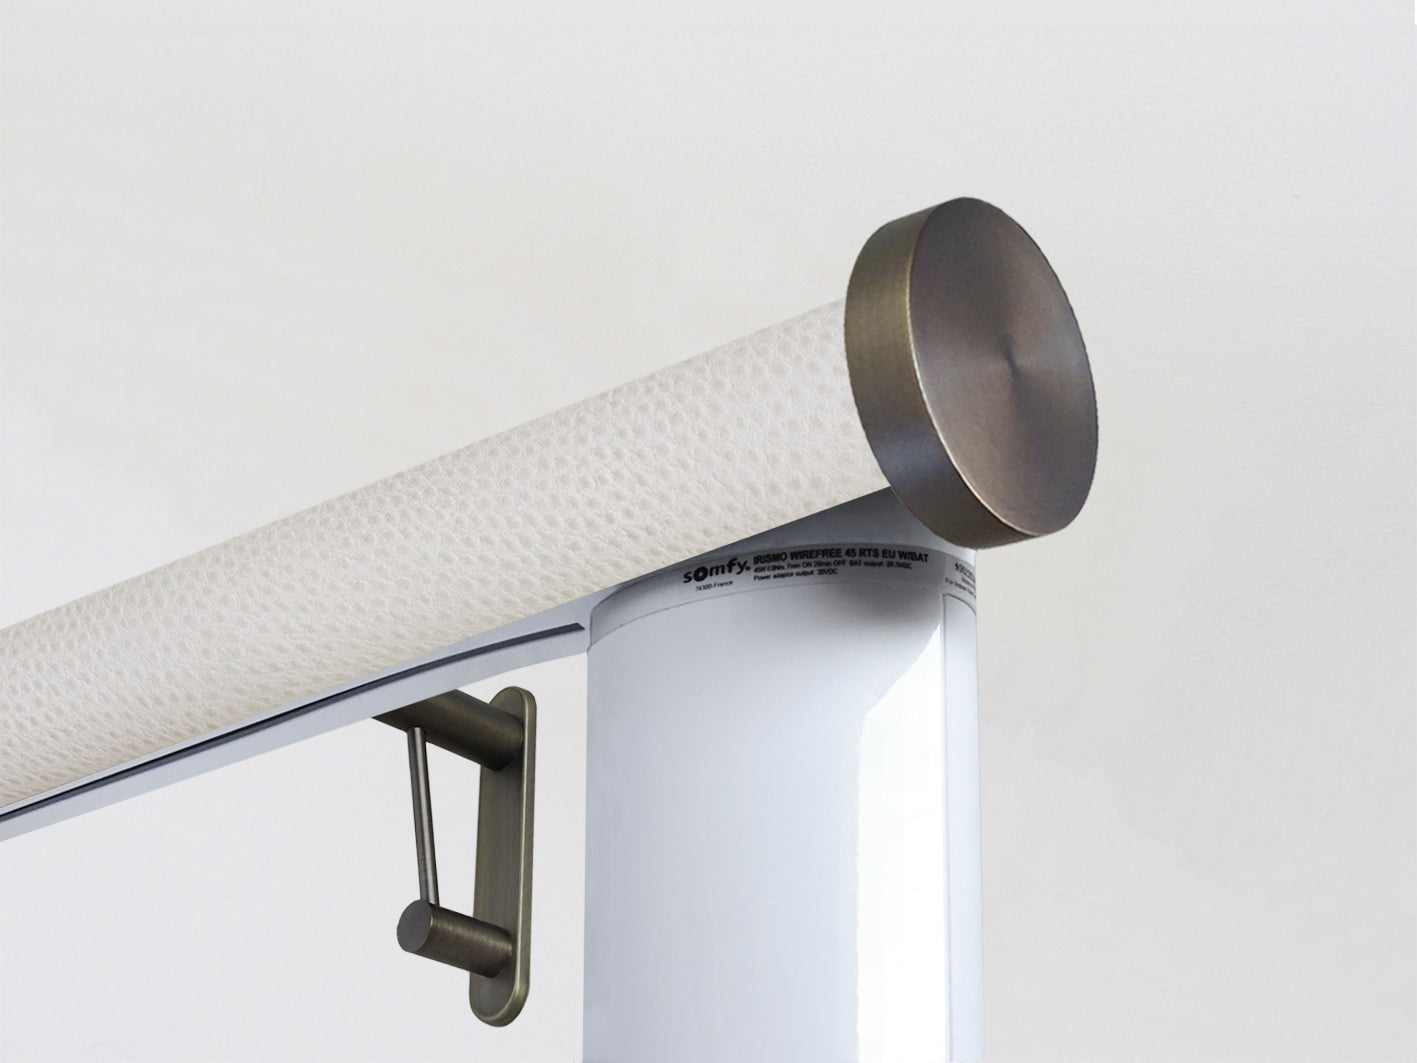 Motorised electric curtain pole in white ostrich, wireless & battery powered using the Somfy Glydea track | Walcot House UK curtain pole specialists